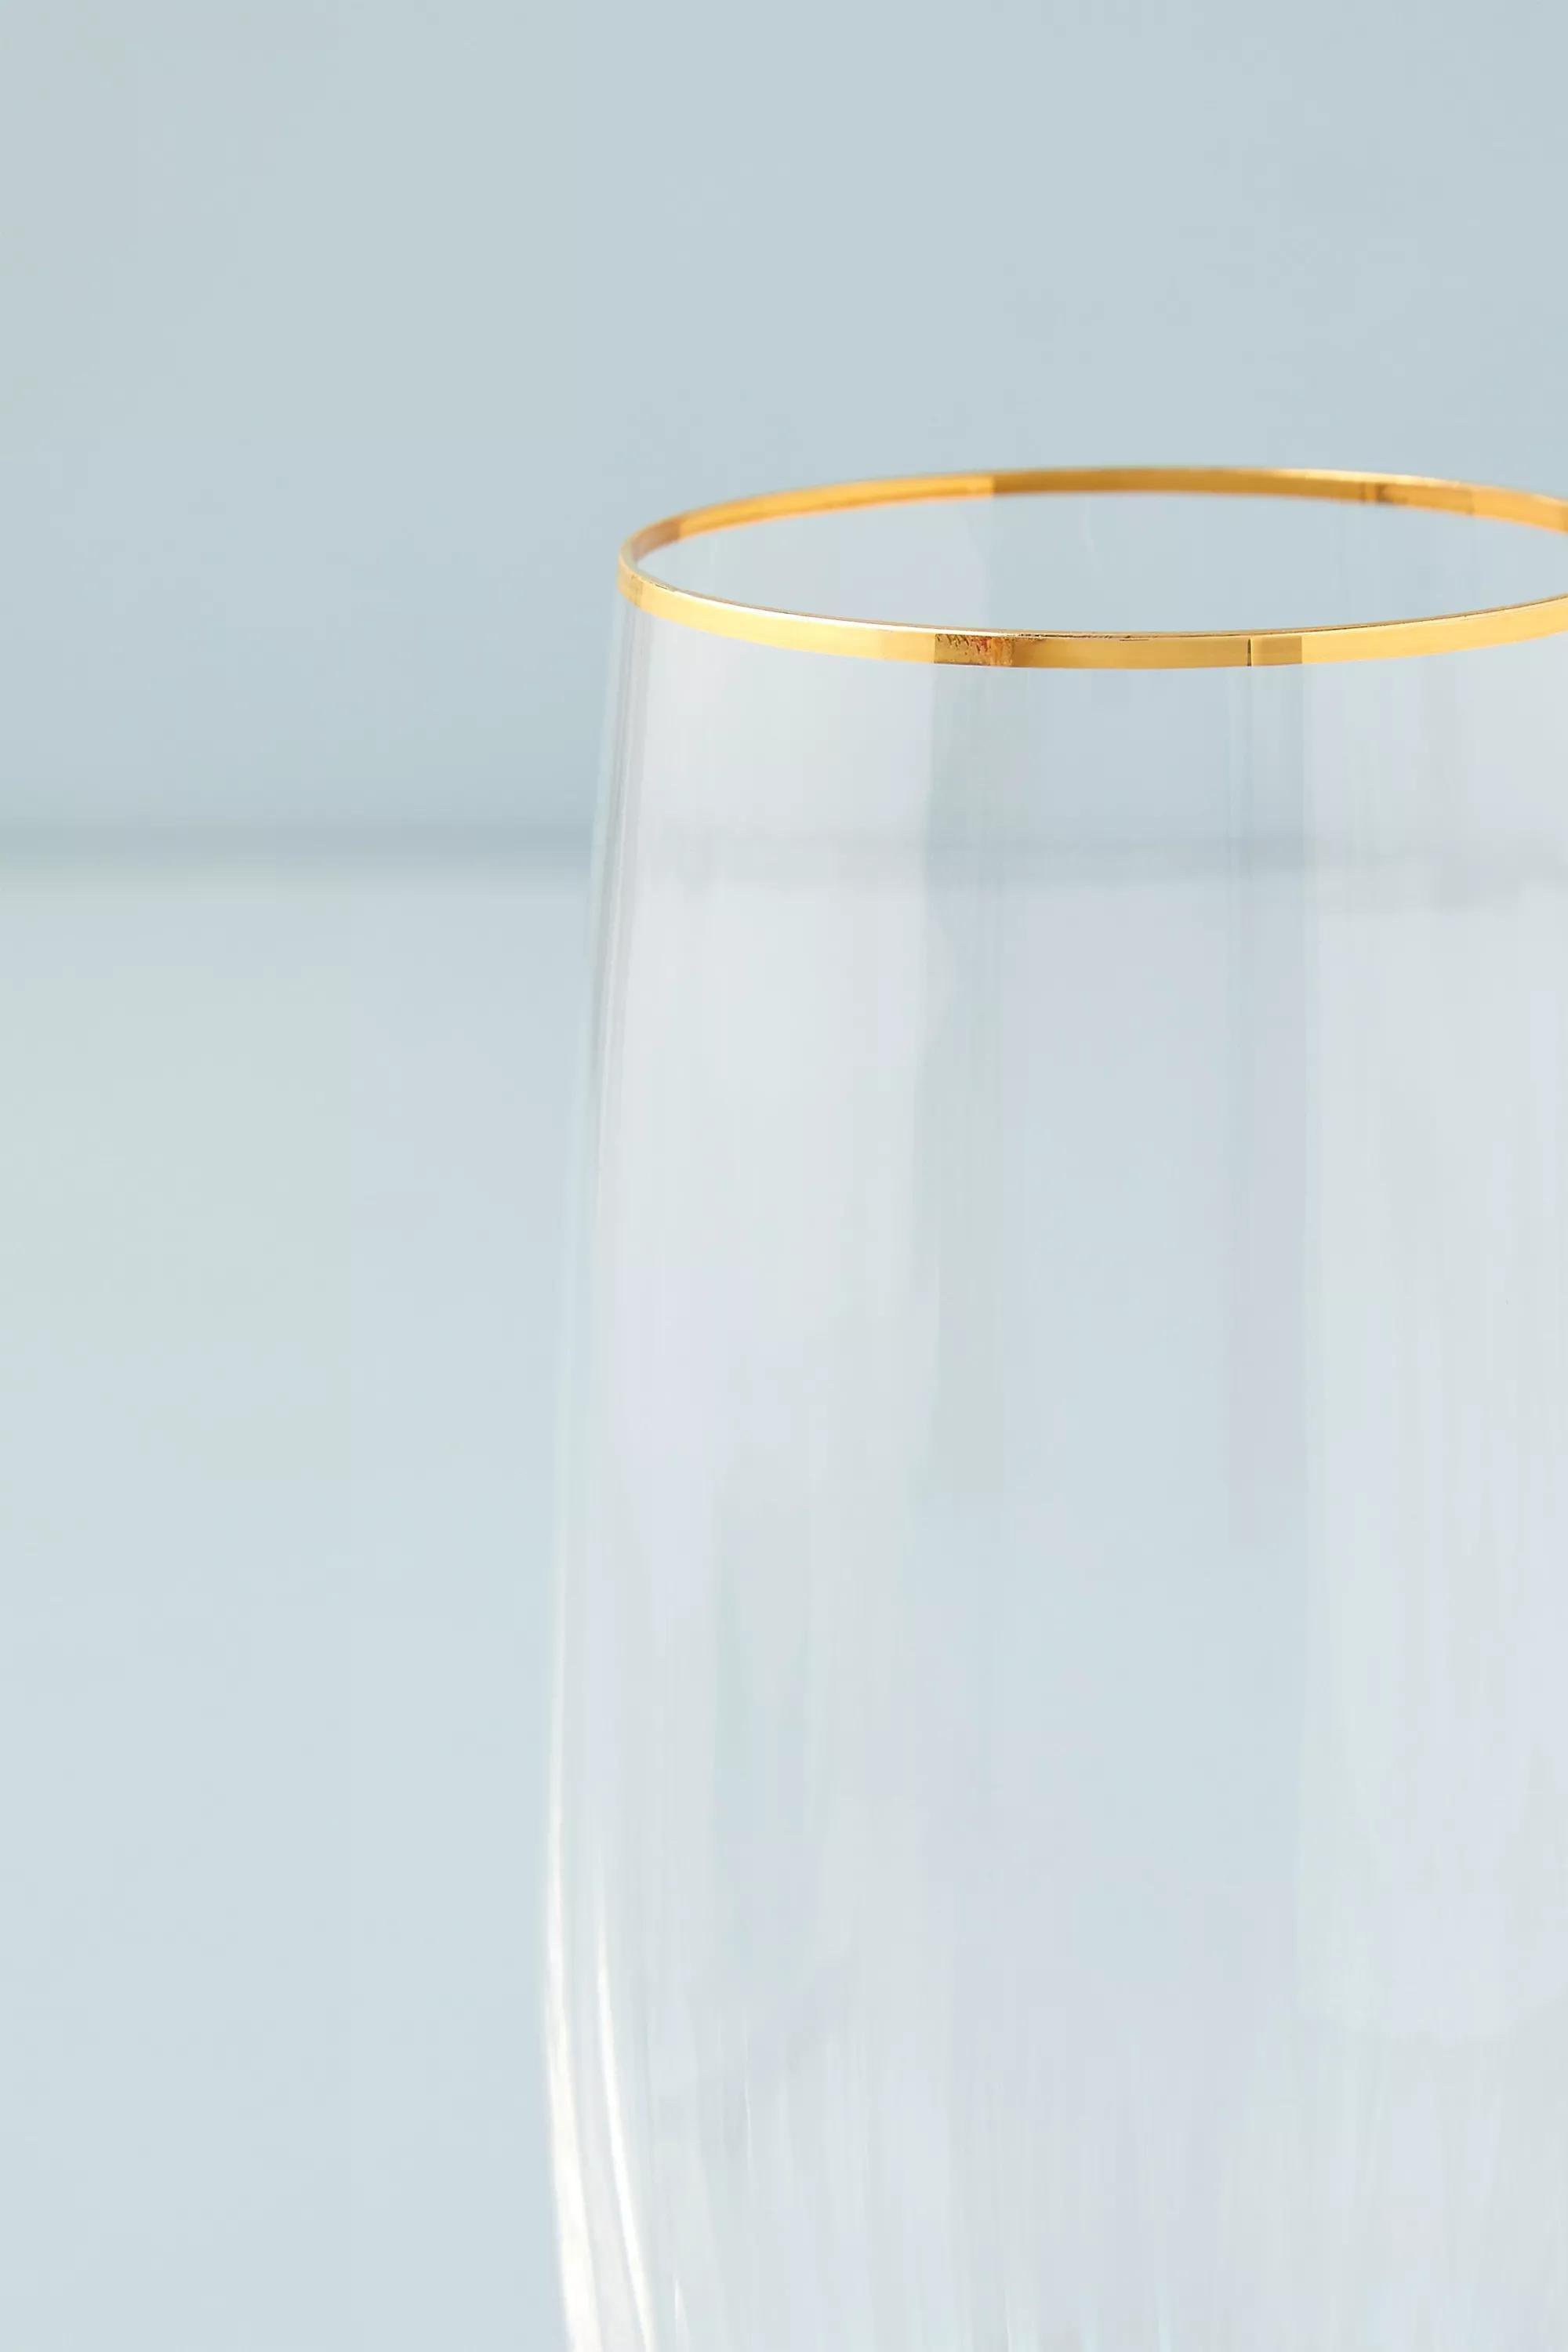 Anthropologie - Waterfall Highball Glass, Oyster